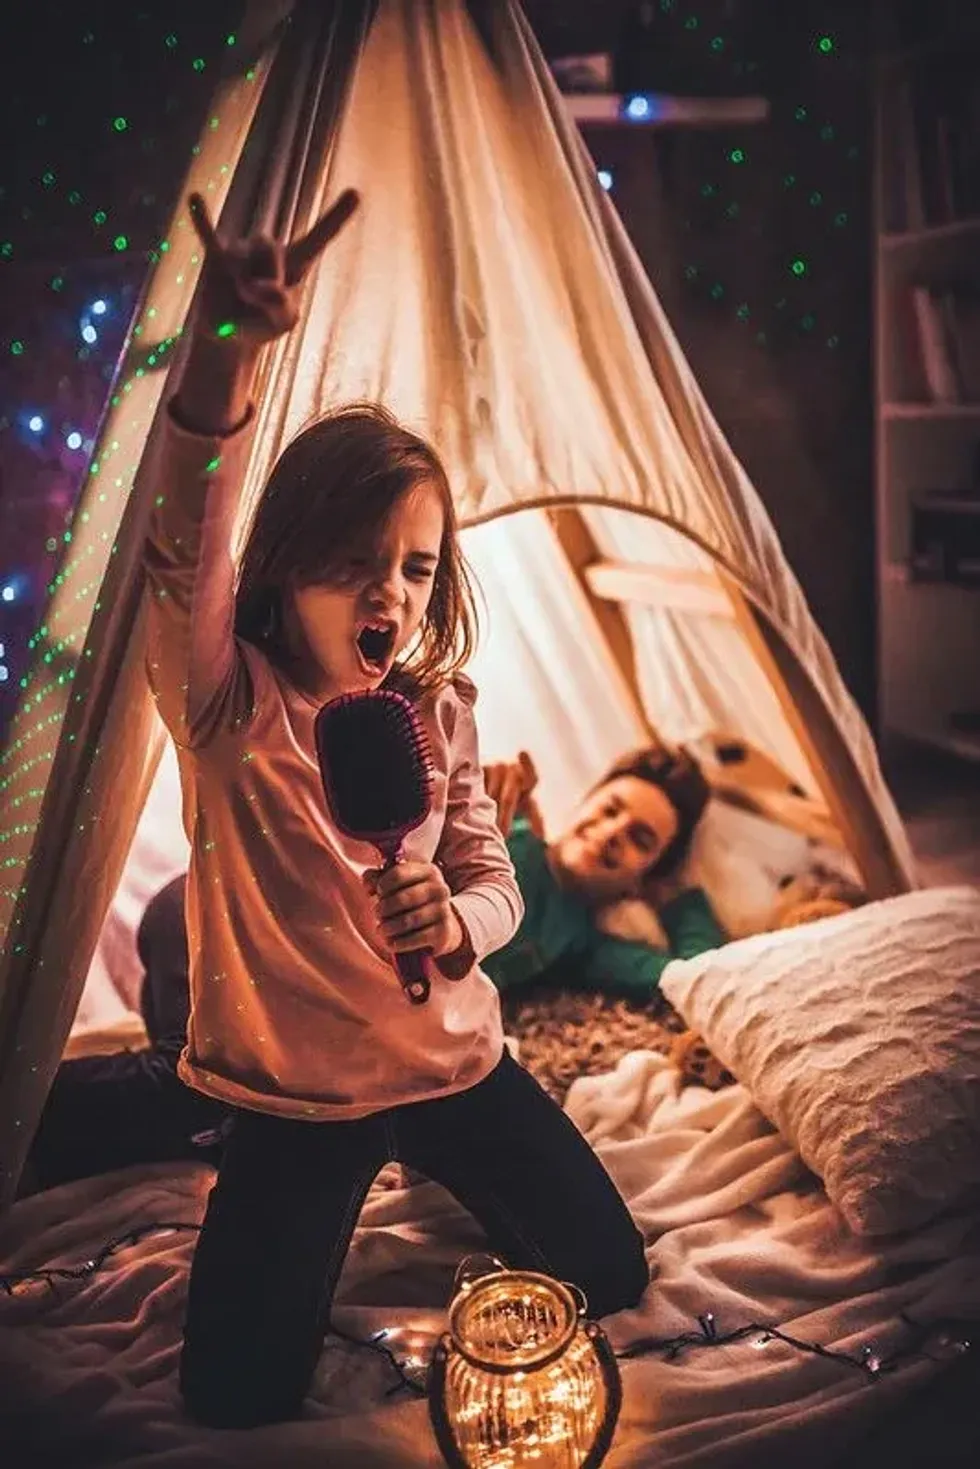 A little girl singing and having fun in a sleepover setting